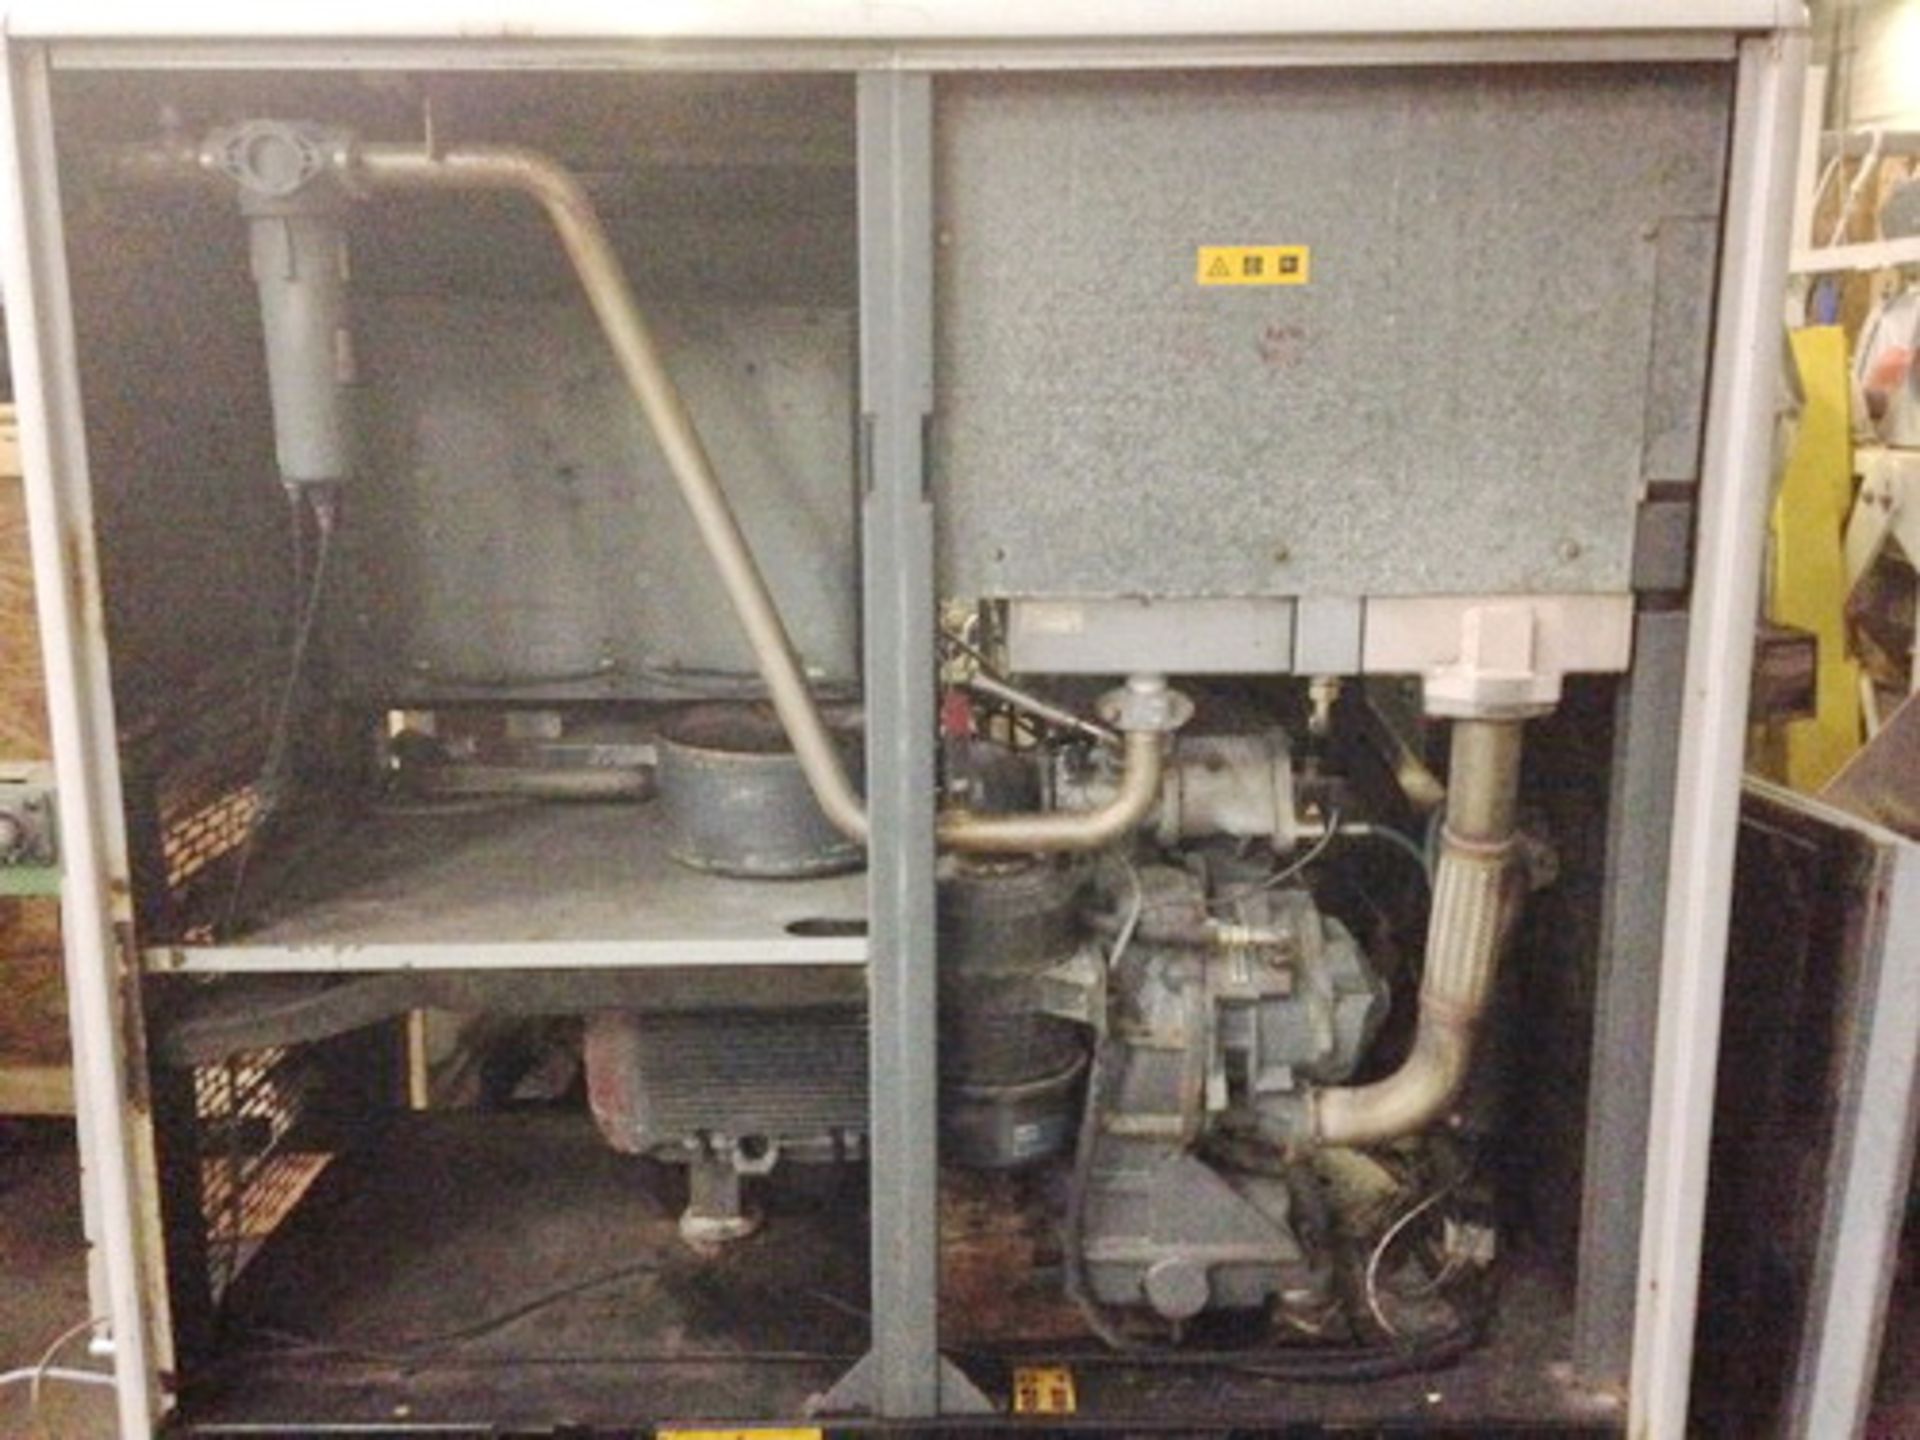 Atlas Copco 60 HP Oil Free air compressor, Model ZT45, S/N AII 702179 with Hankinson Air Dryer - Image 5 of 5